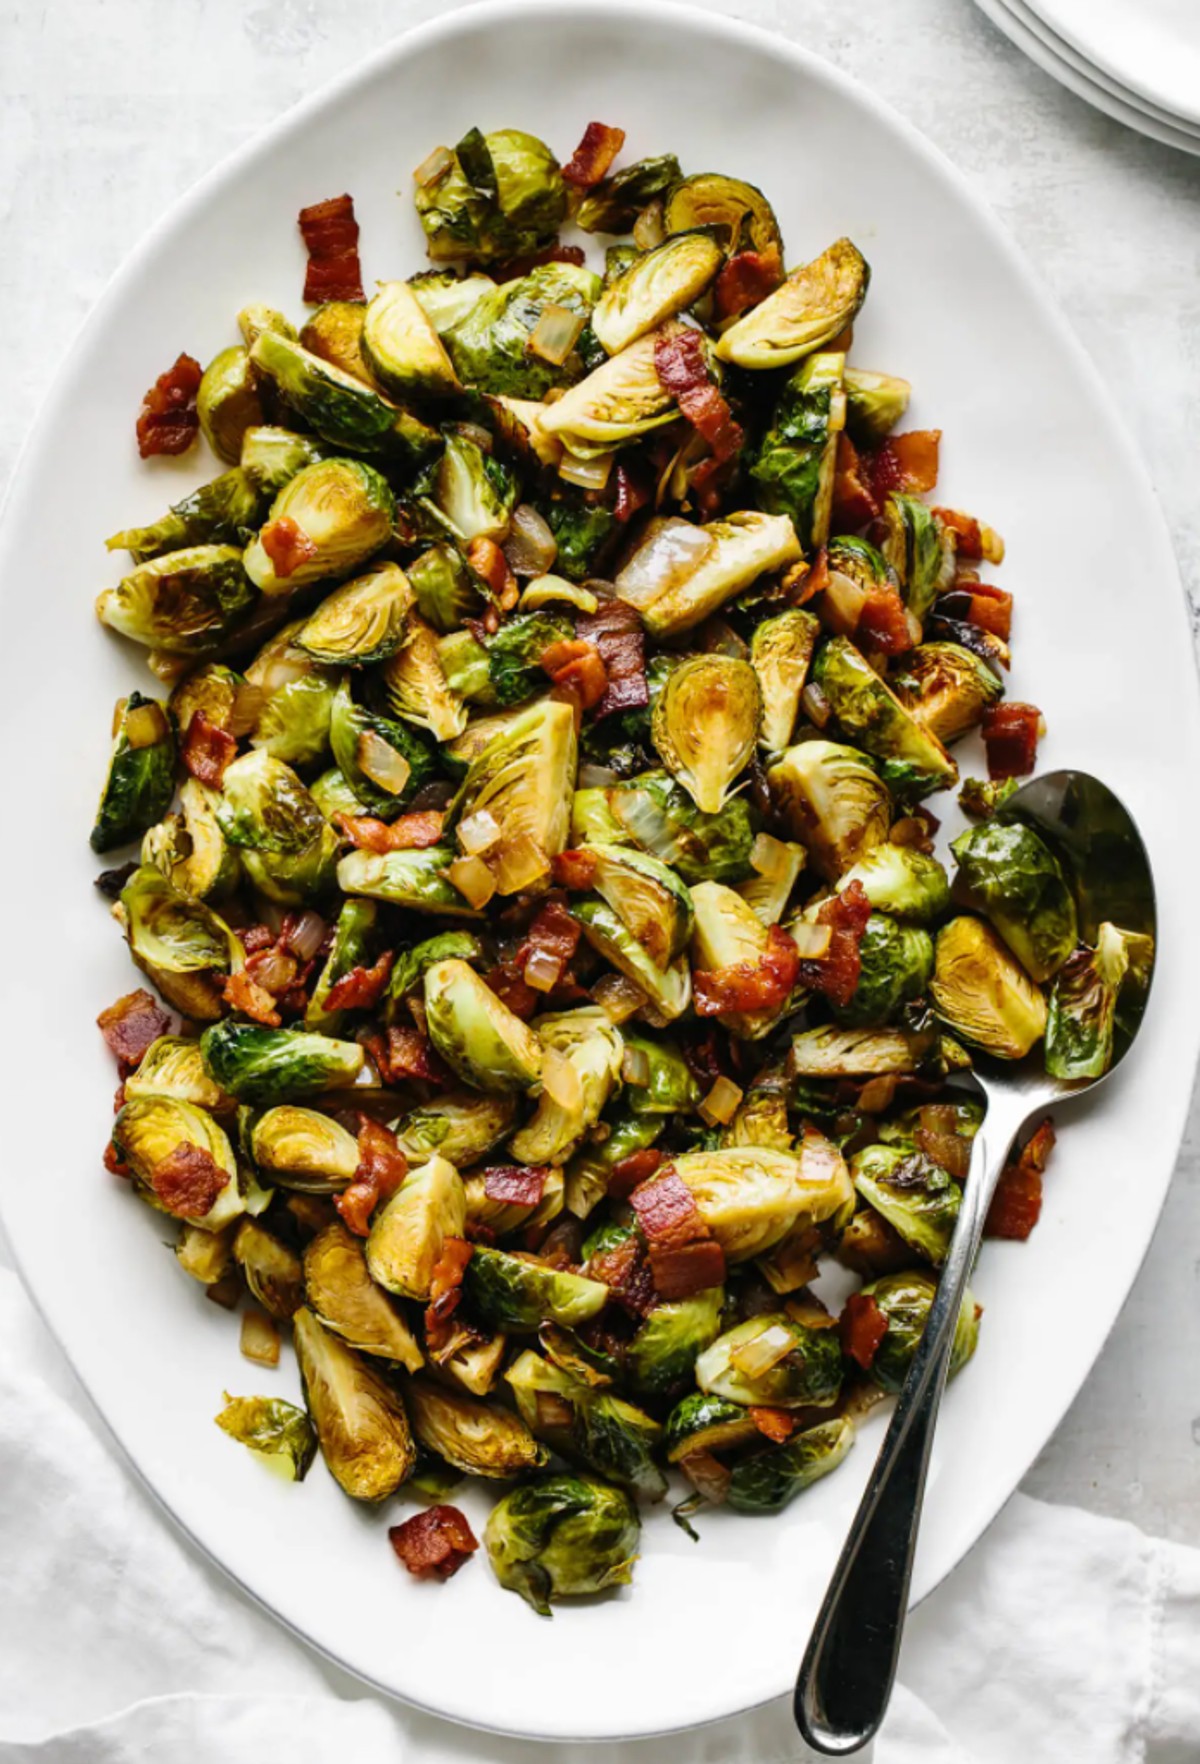 BALSAMIC BACON BRUSSELS SPROUTS